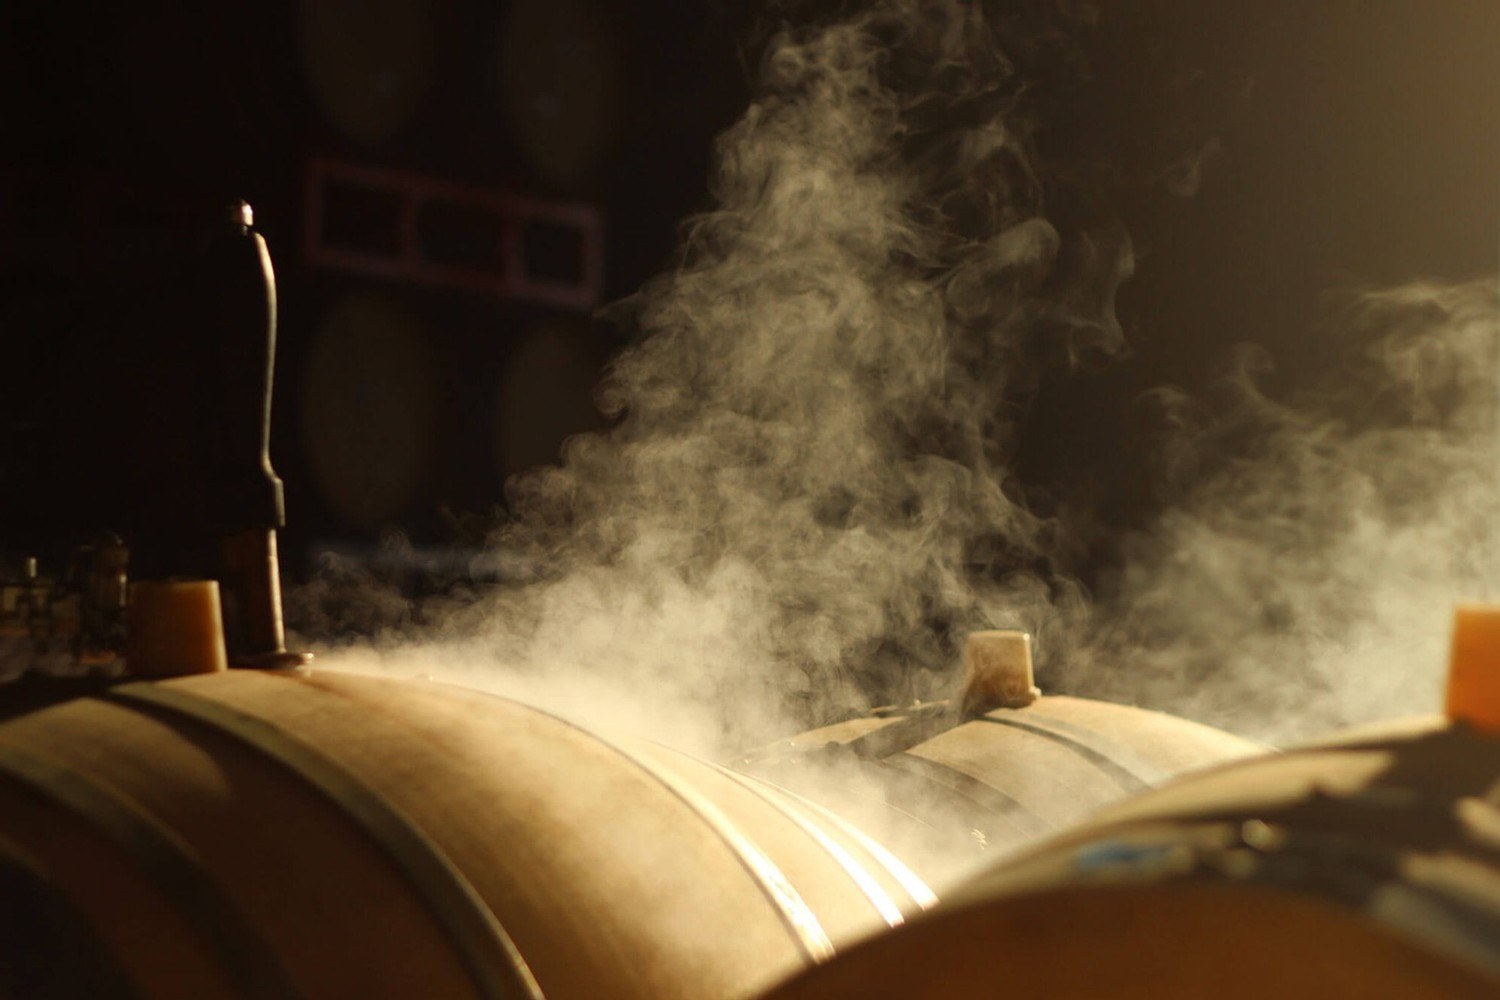 Niner barrels being steam-cleaned at the winery